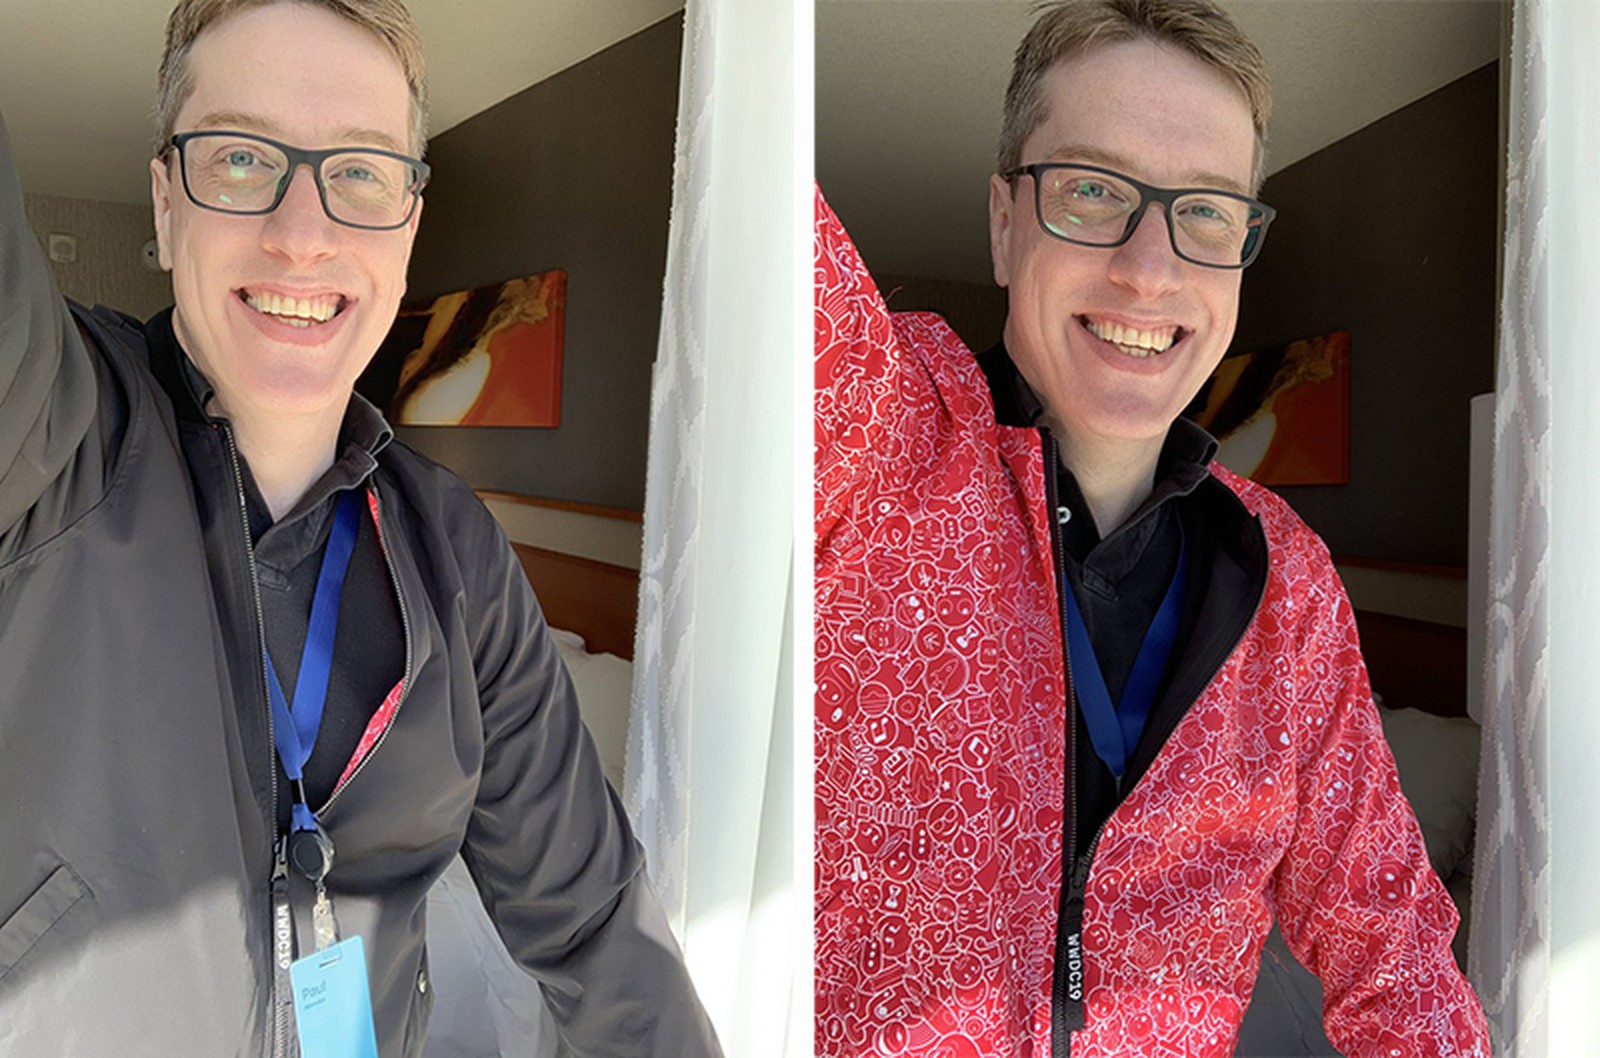 WWDC 2019 Swag Includes Reversible Jacket, Magnetic Pins ...